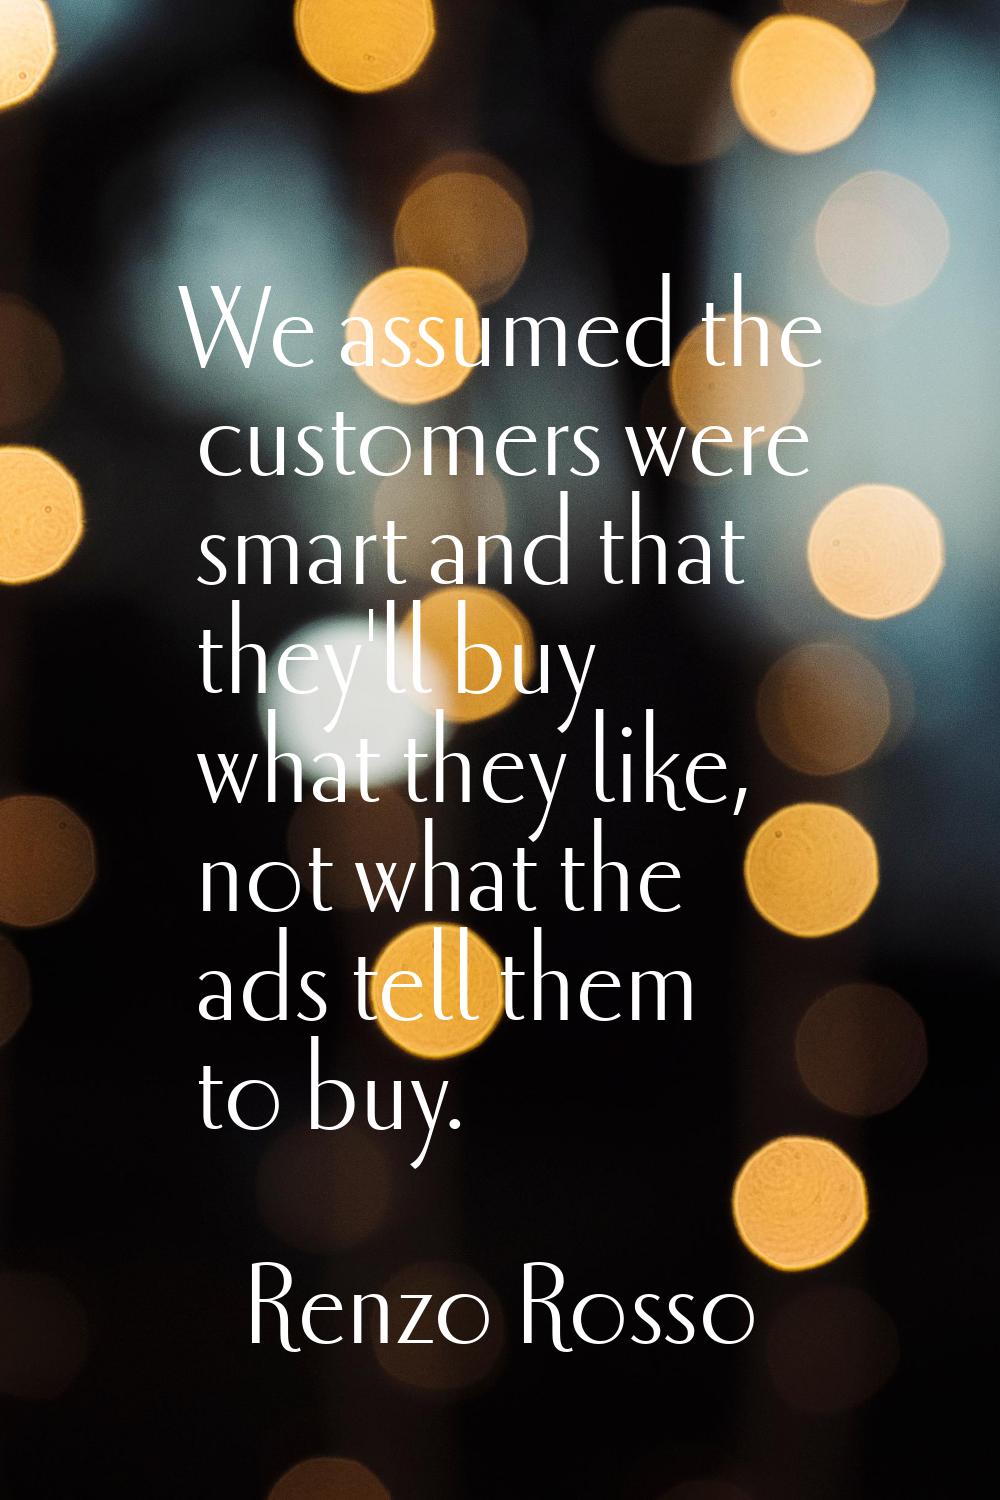 We assumed the customers were smart and that they'll buy what they like, not what the ads tell them